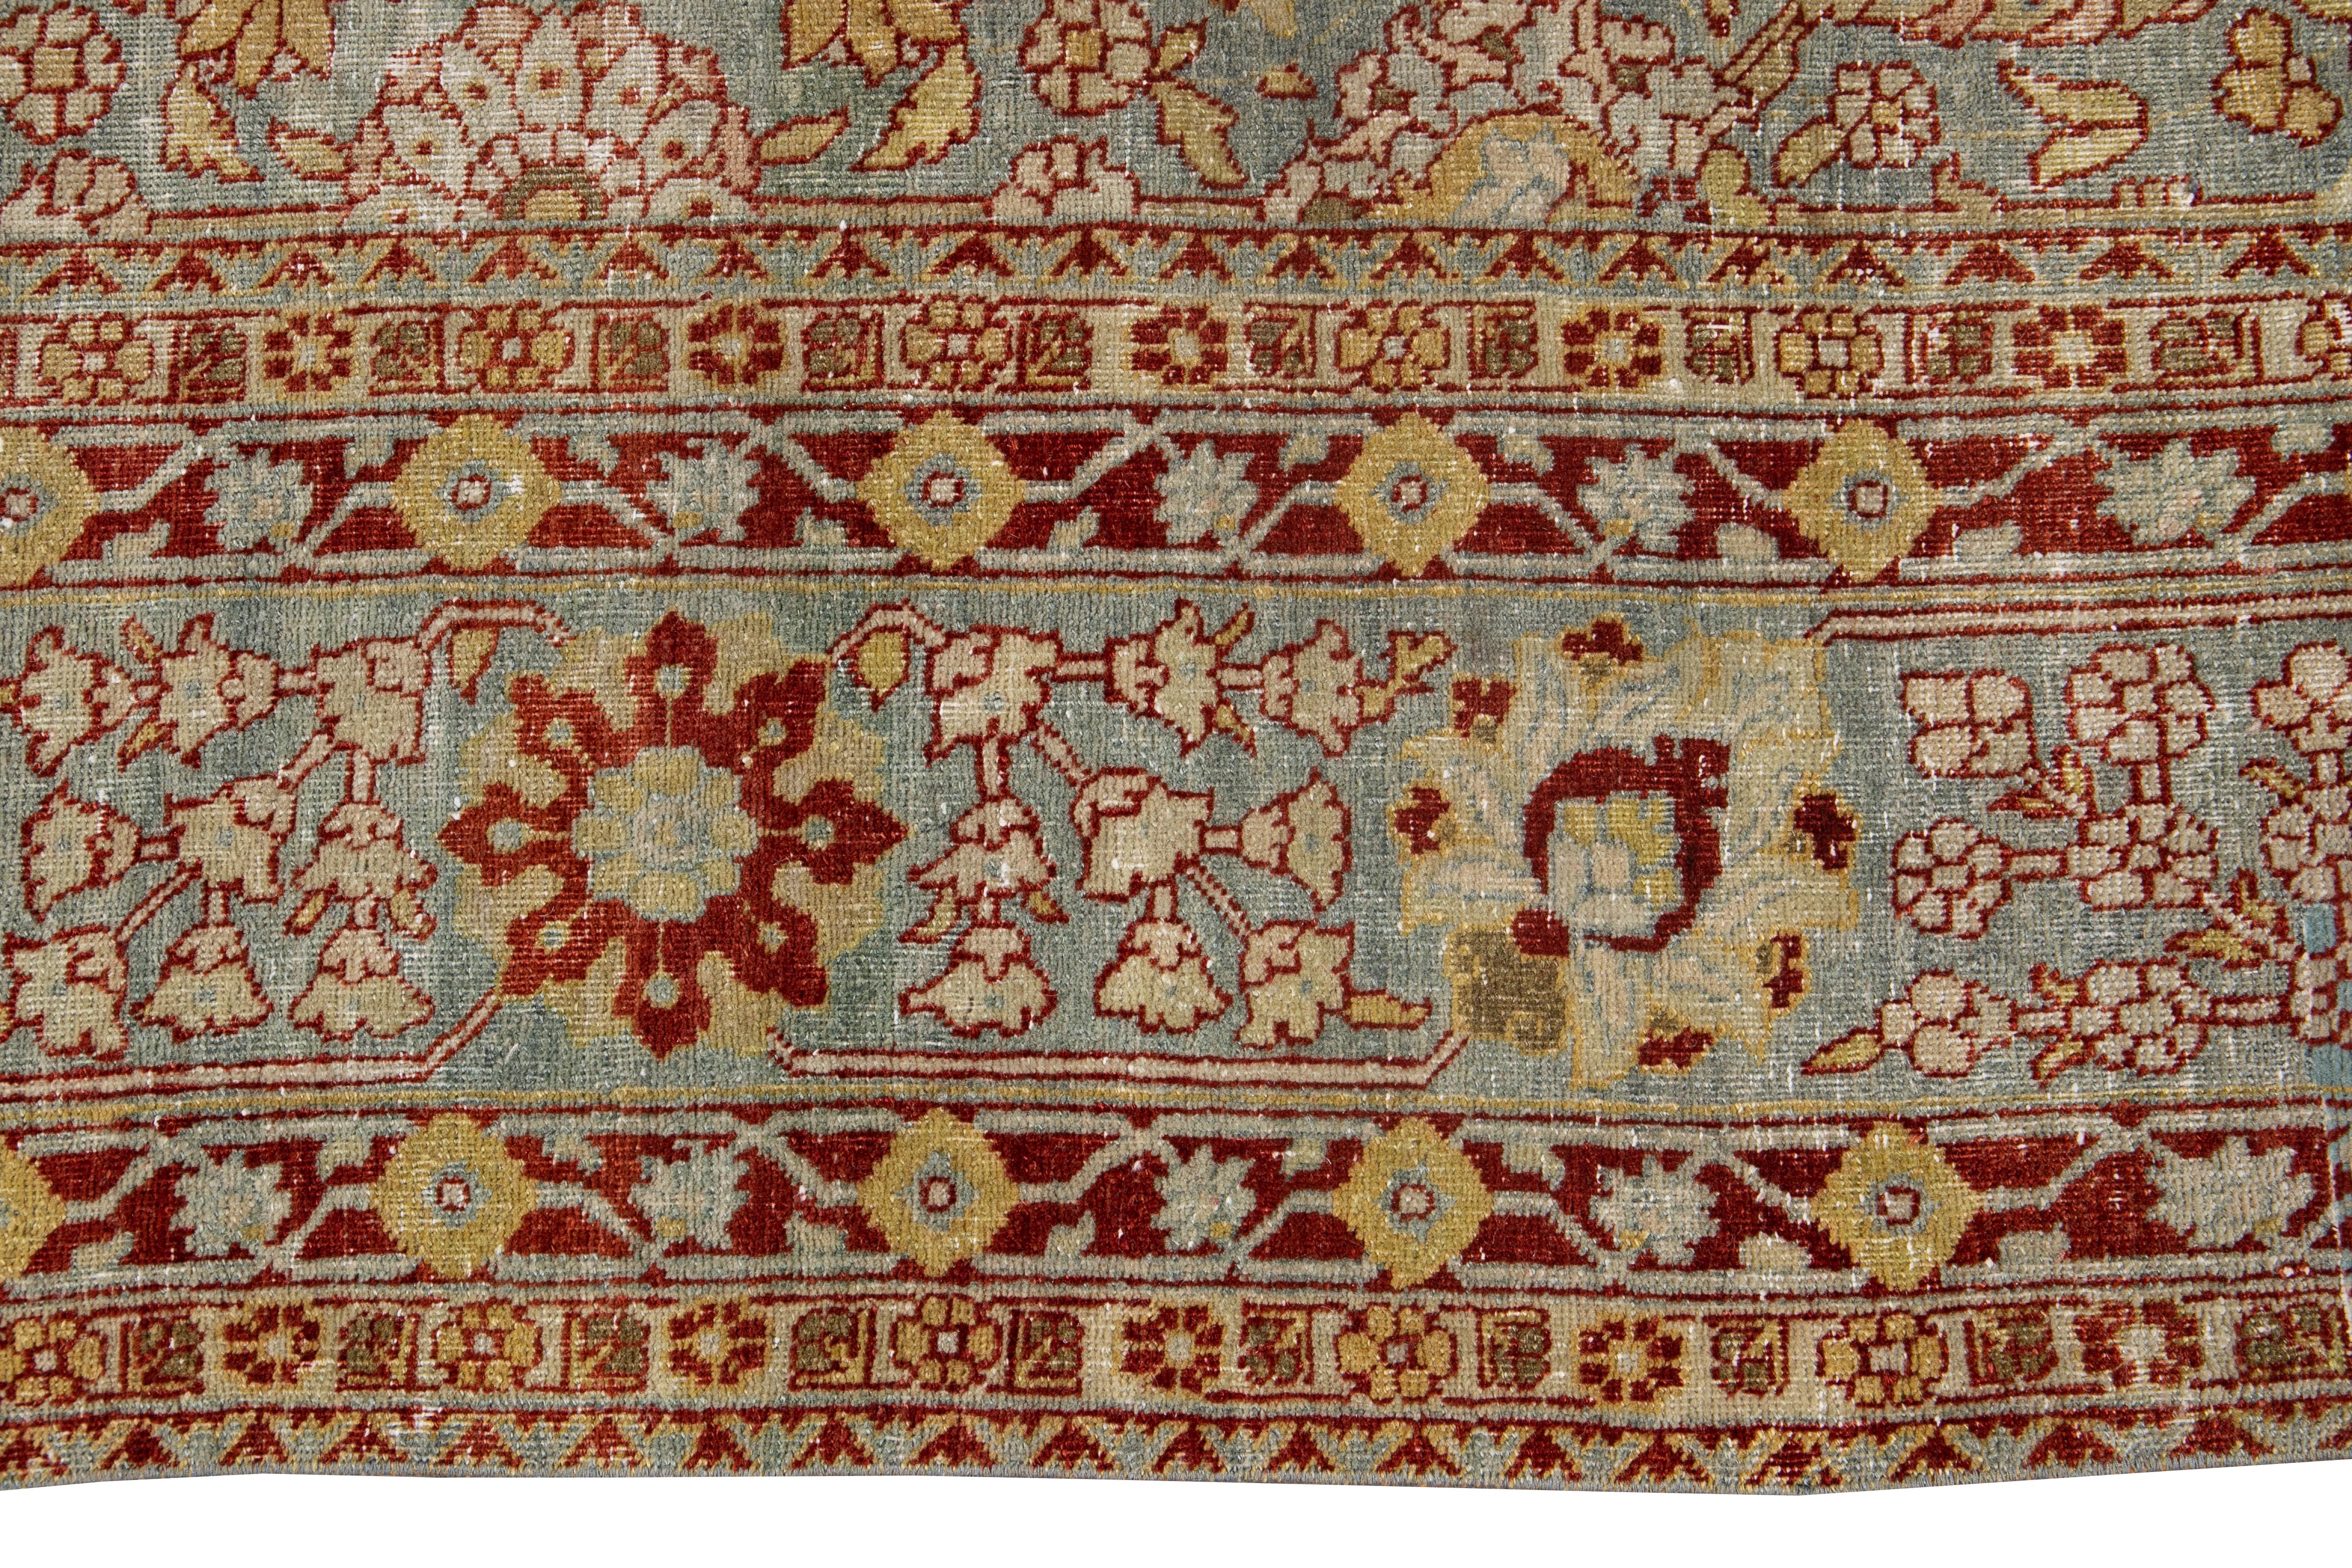 Beautiful Persian Tabriz rug, hand knotted wool with a light blue field, yellow and ivory accents in all-over floral design, circa 1920.
This rug measures 9' 0